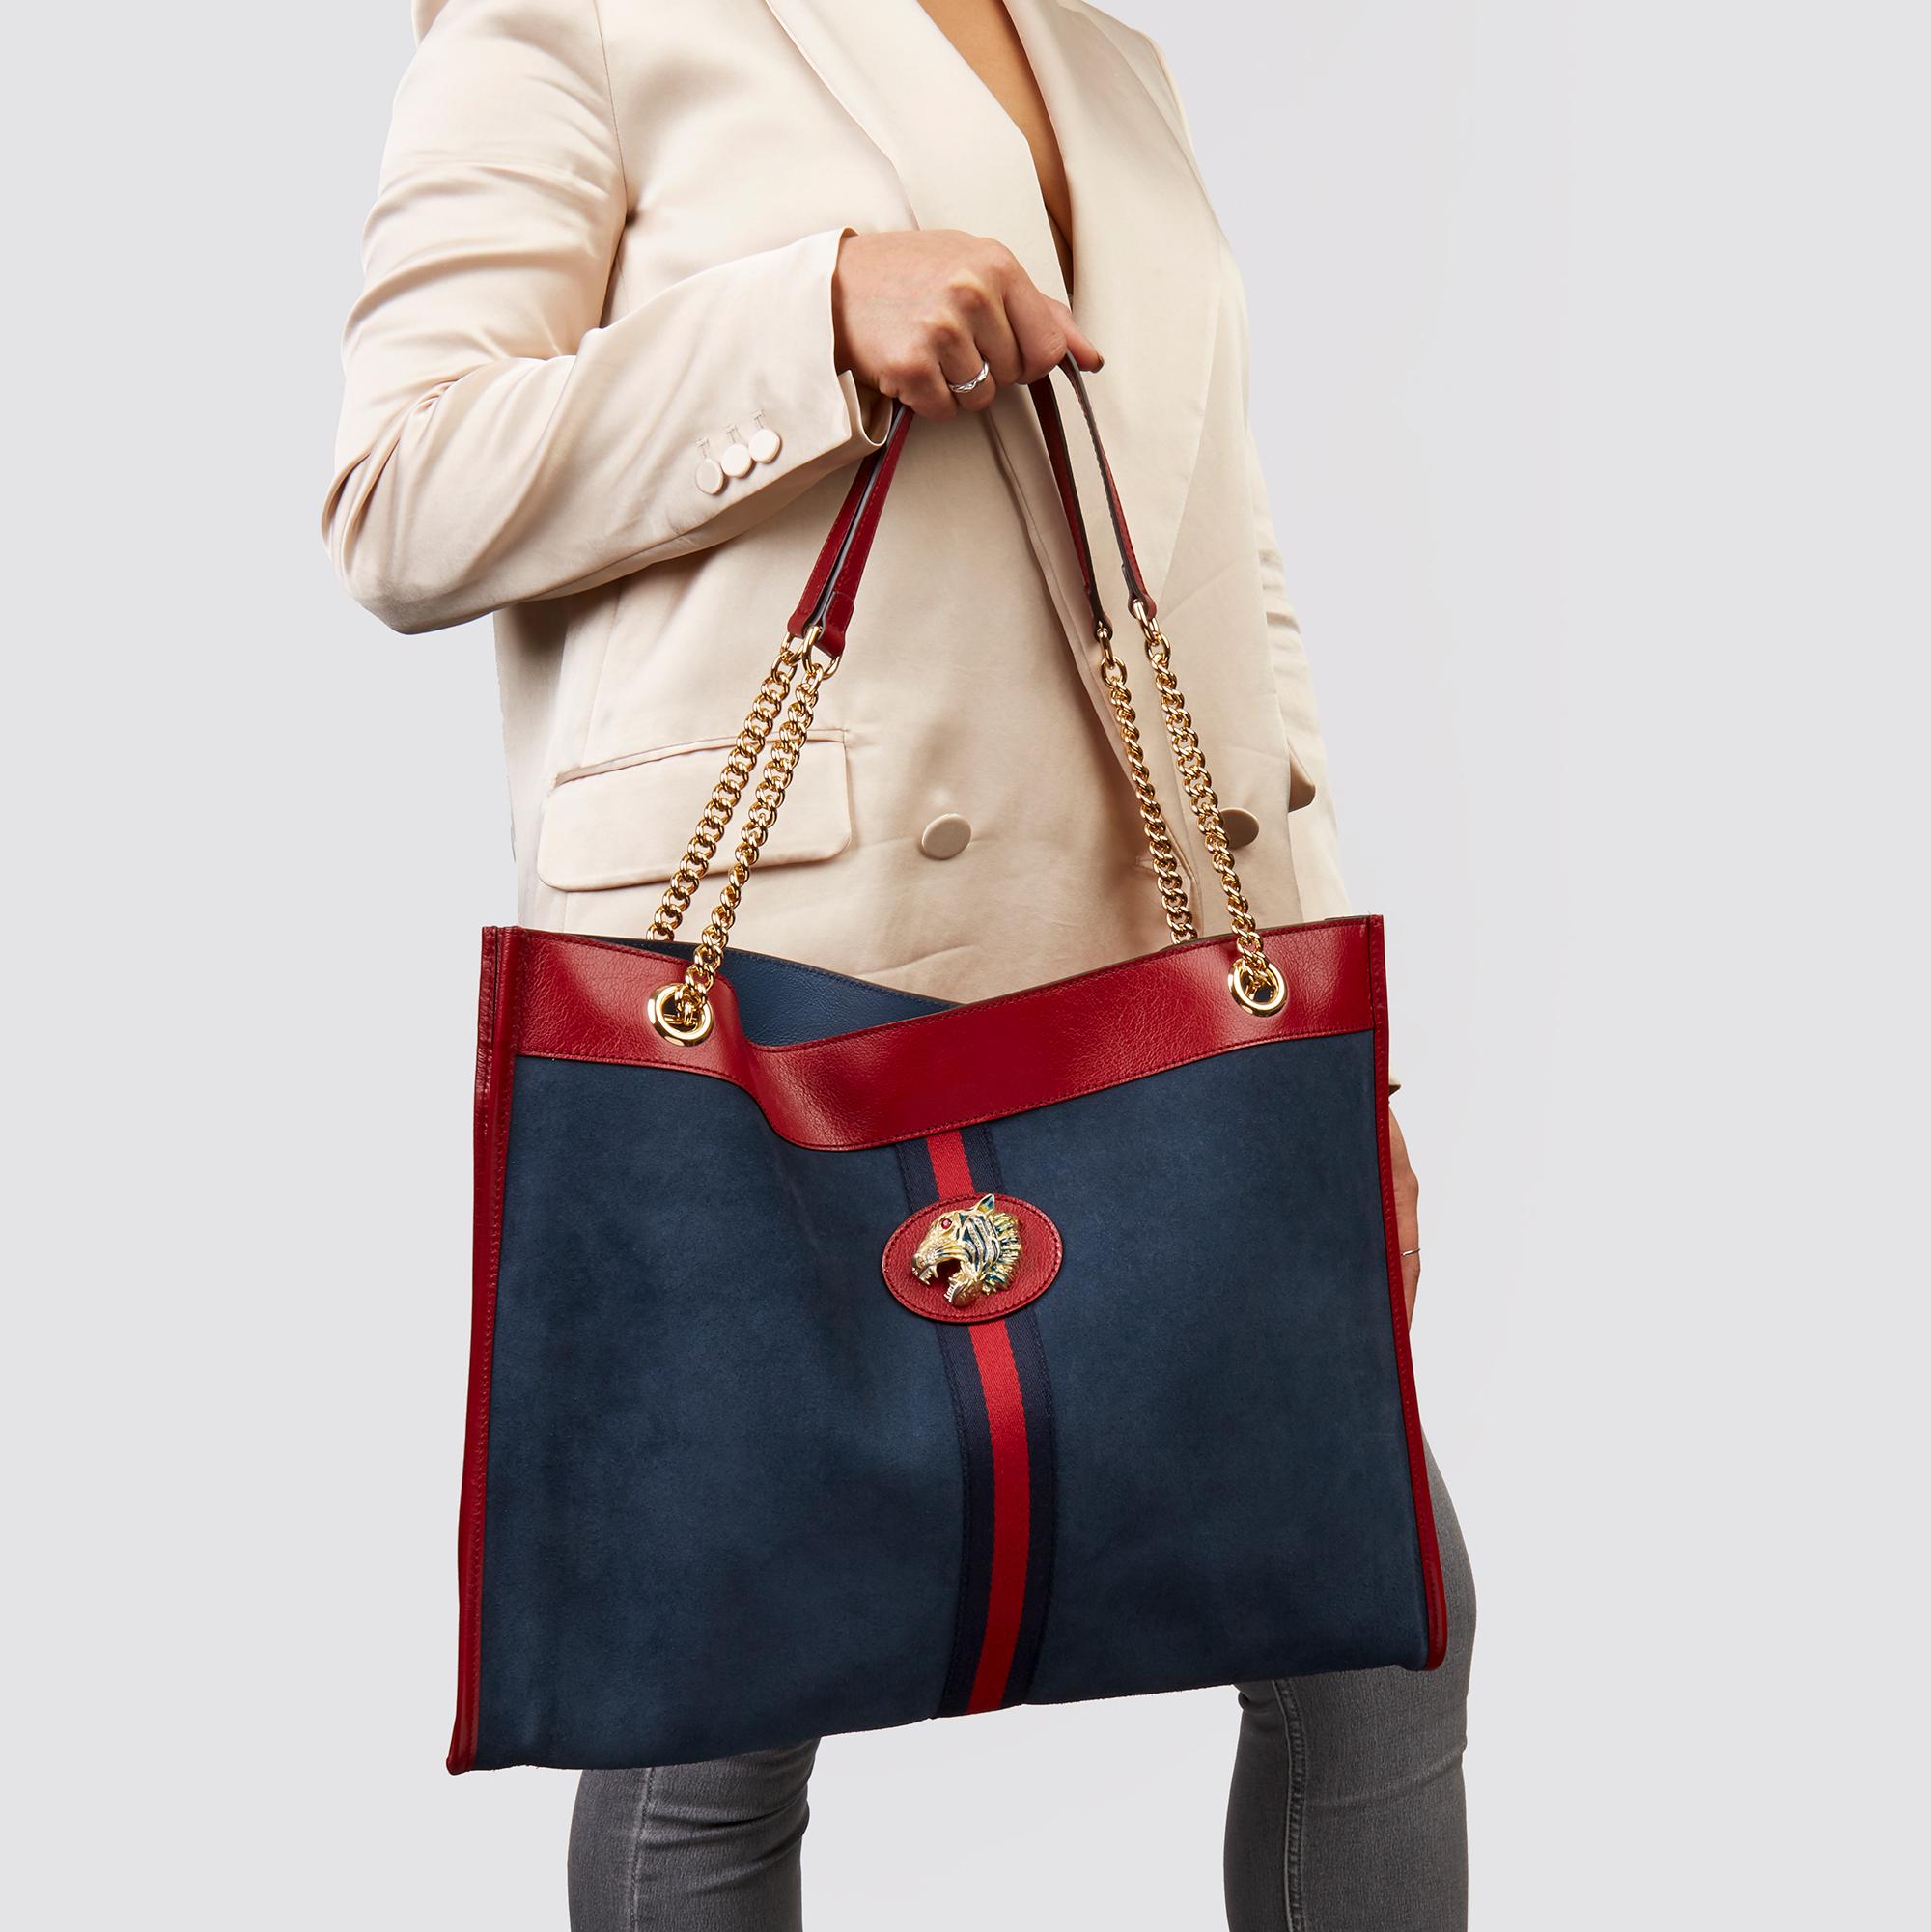 GUCCI
Red Aged Calfskin Leather & Blue Suede Web Large Rajah Tote

Xupes Reference: HB3476
Serial Number: 537319 498879
Age (Circa): 2020
Accompanied By: Gucci Dust Bag, Interior Pouch, Care Booklet
Authenticity Details: Date Stamp (Made in